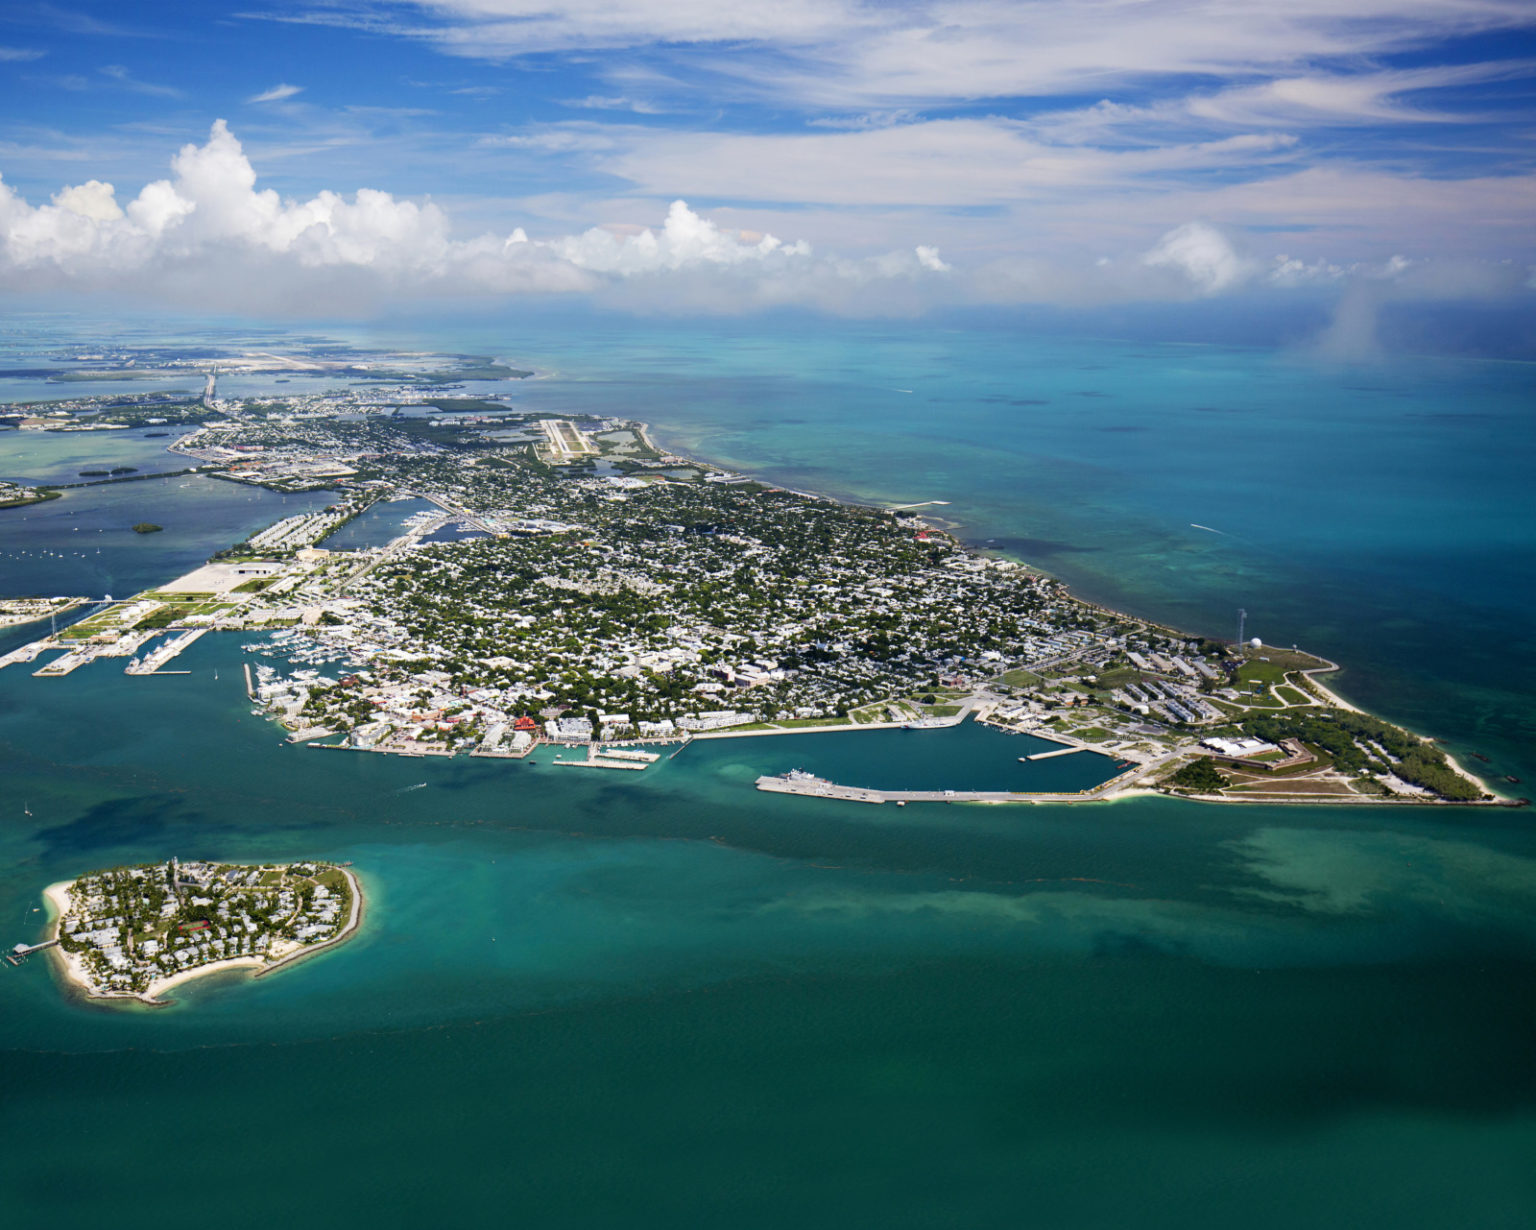 SAVE THE DATE: WHAT S ON YOUR KEY WEST CALENDAR?